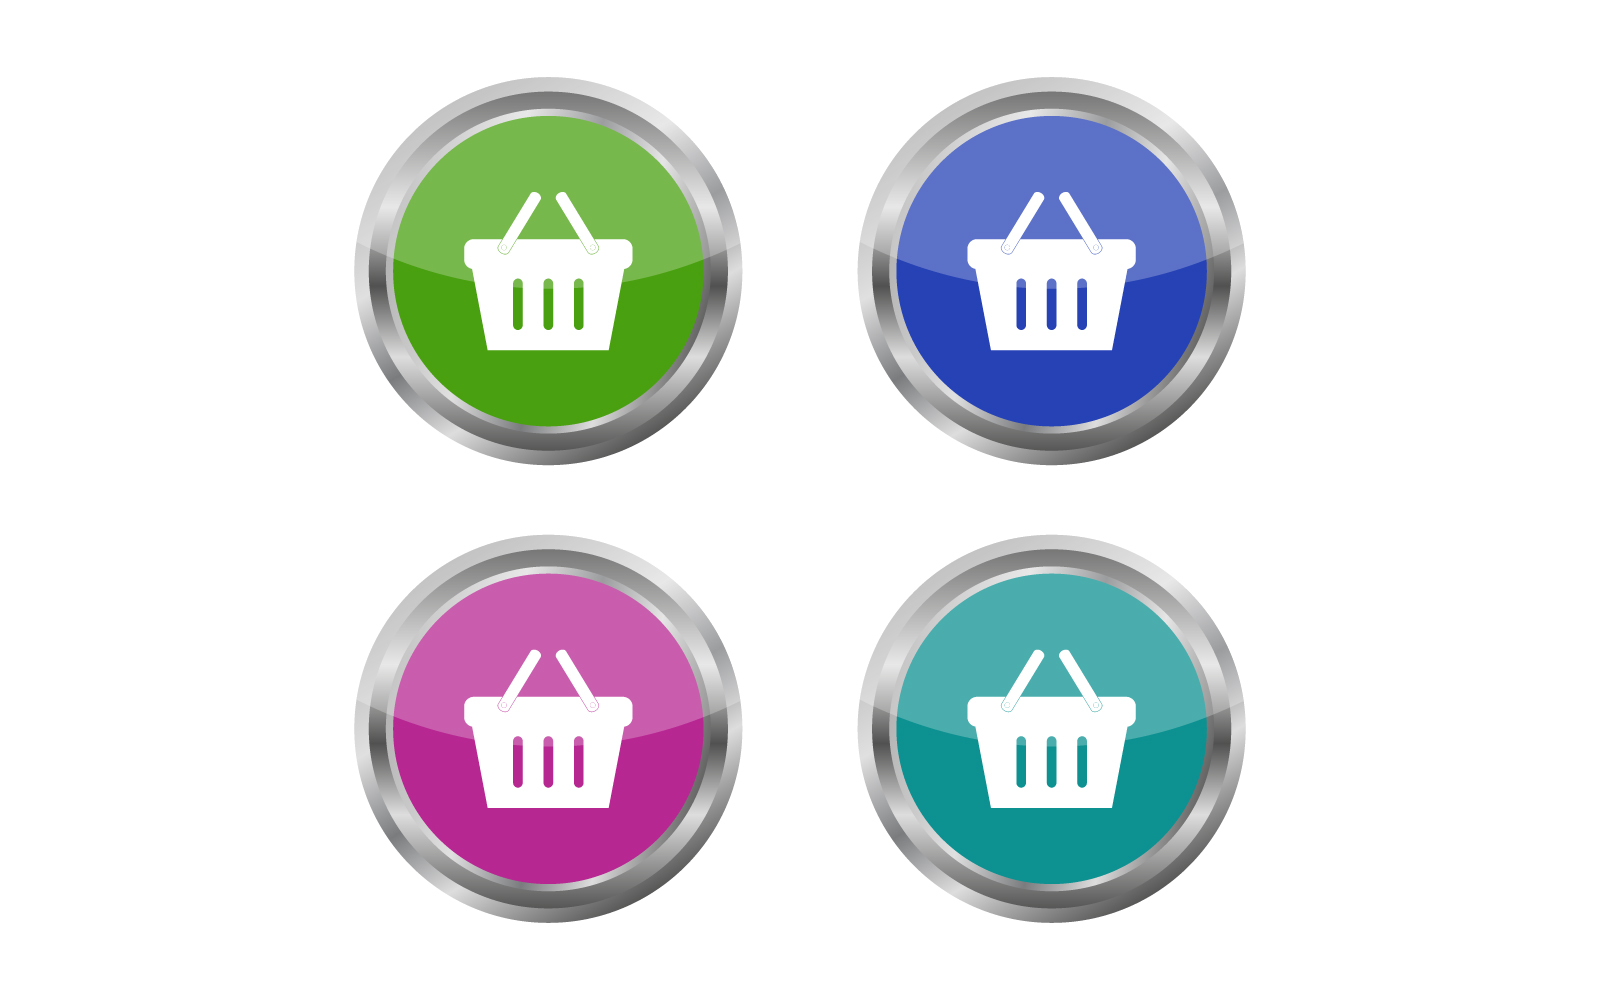 Shop button illustrated and colored in vector on a white background